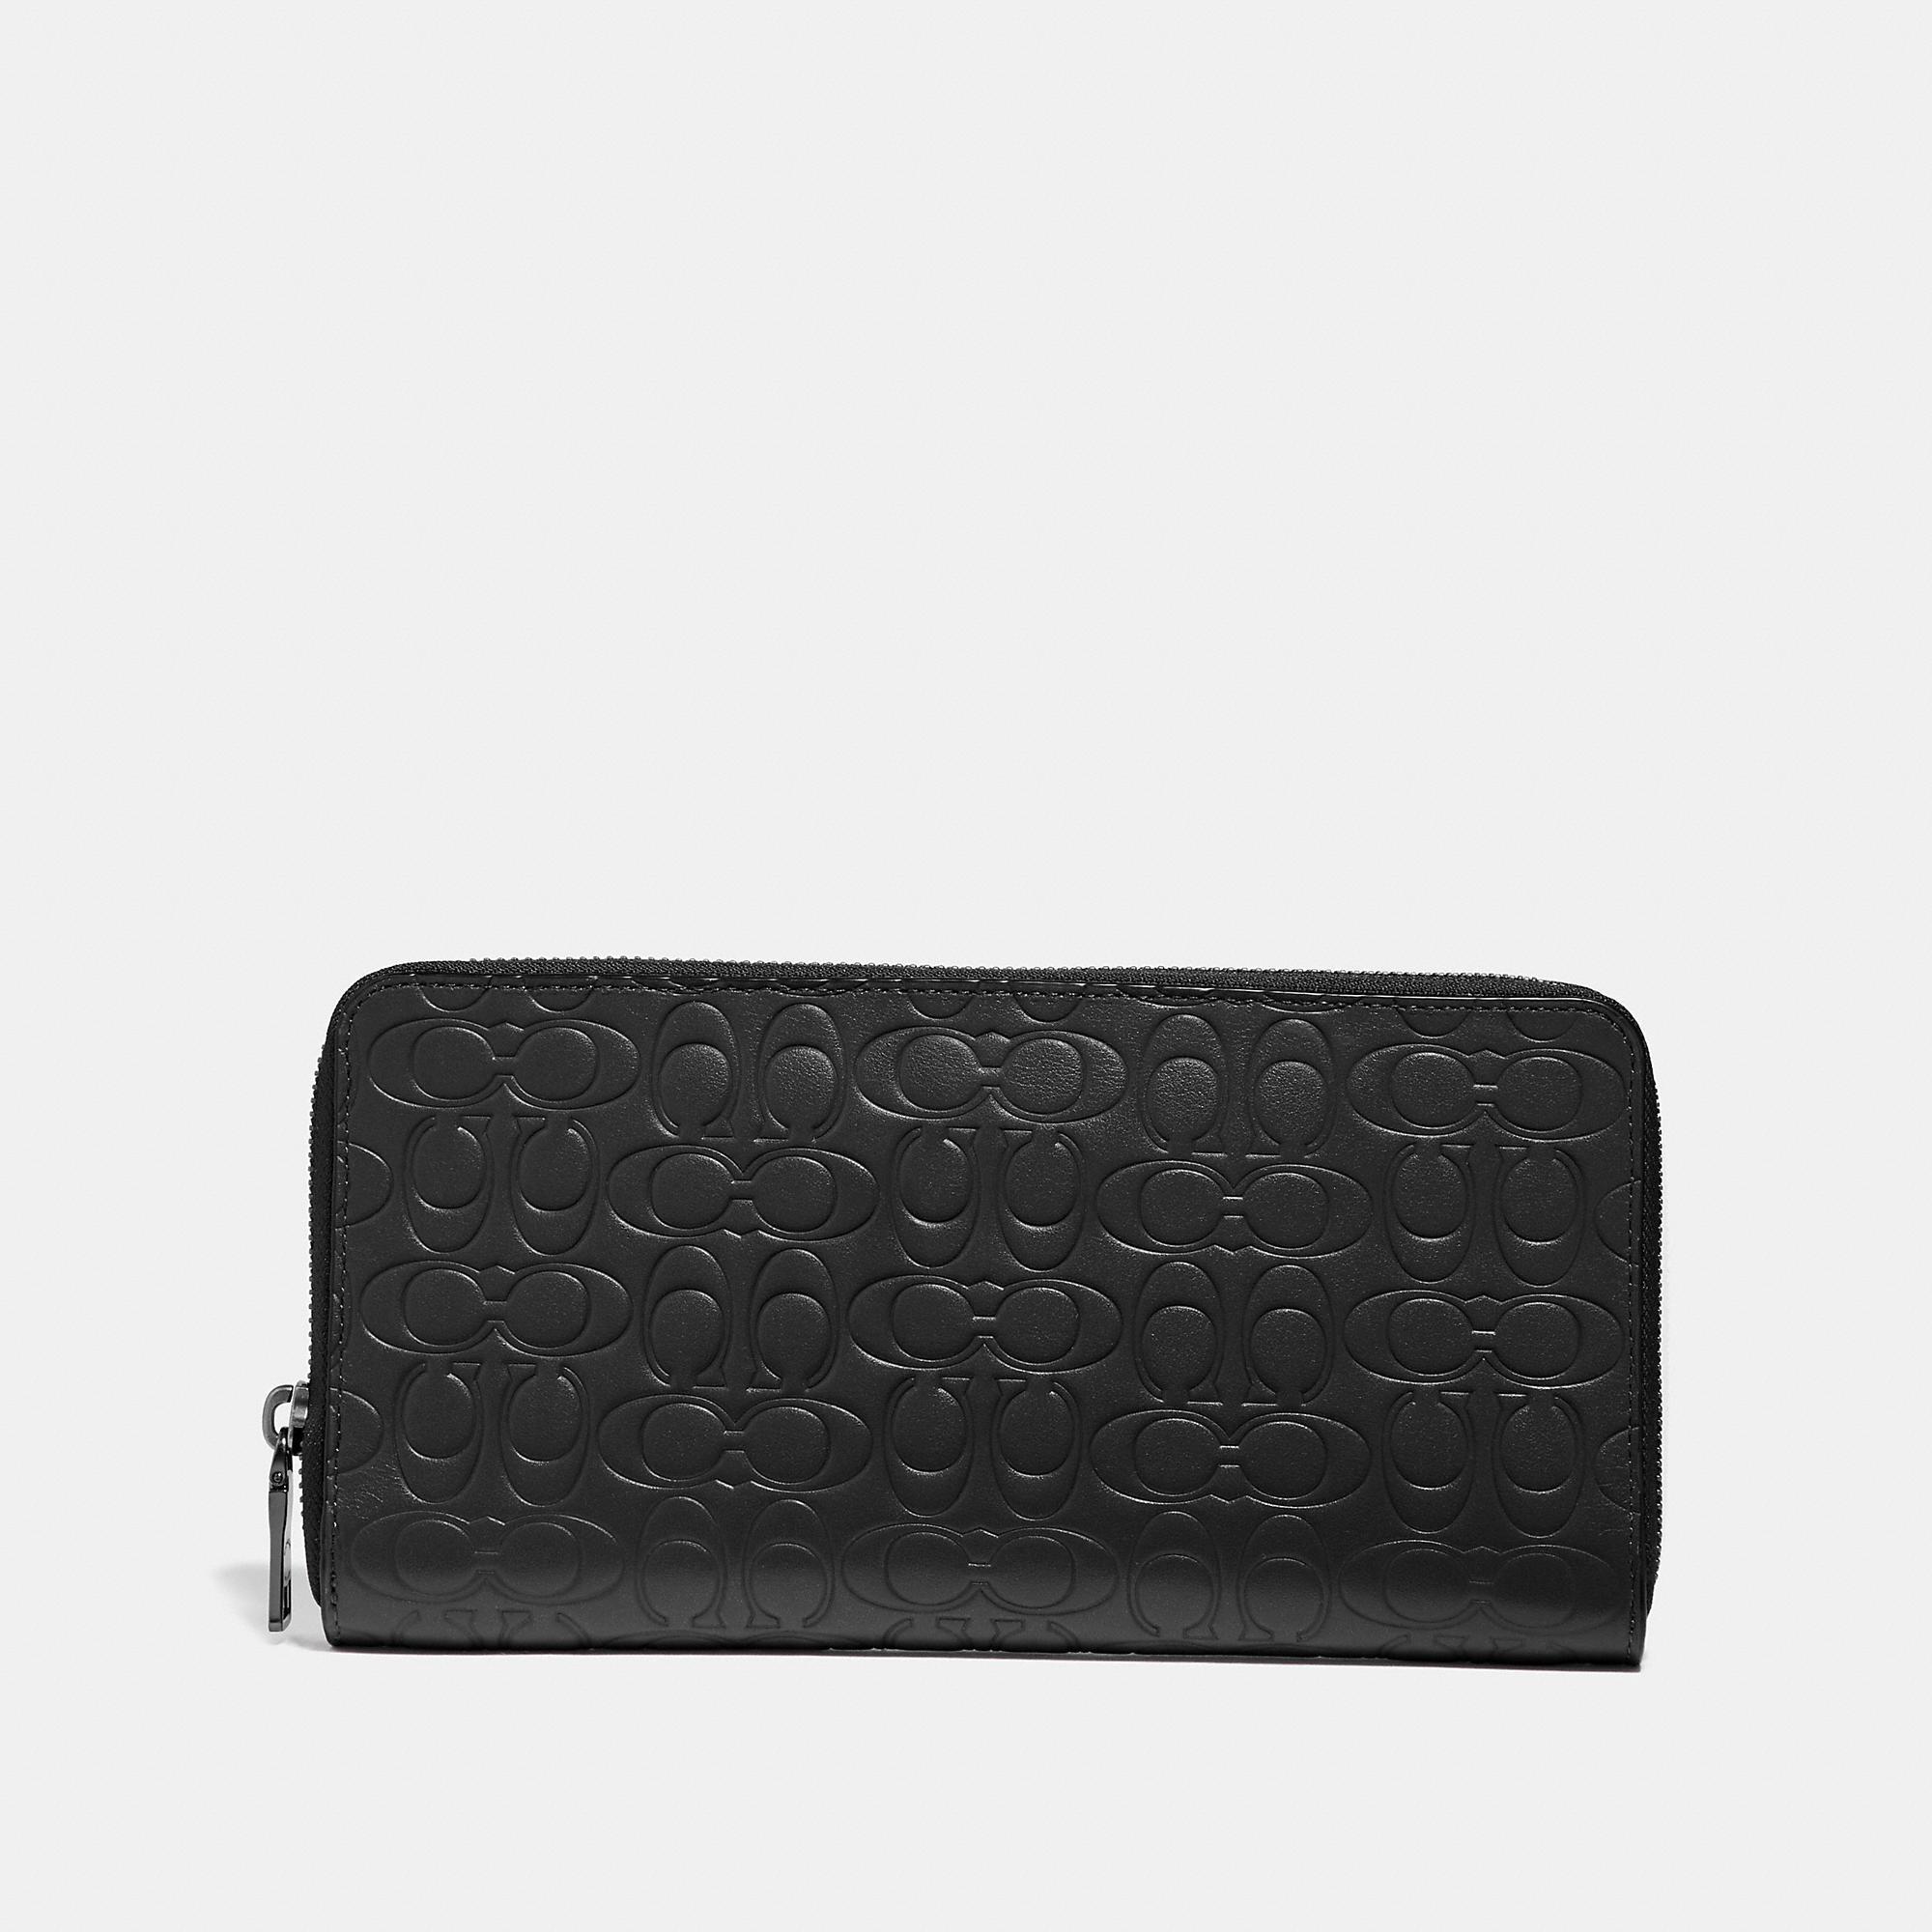 COACH Travel Wallet In Signature Leather in Black for Men